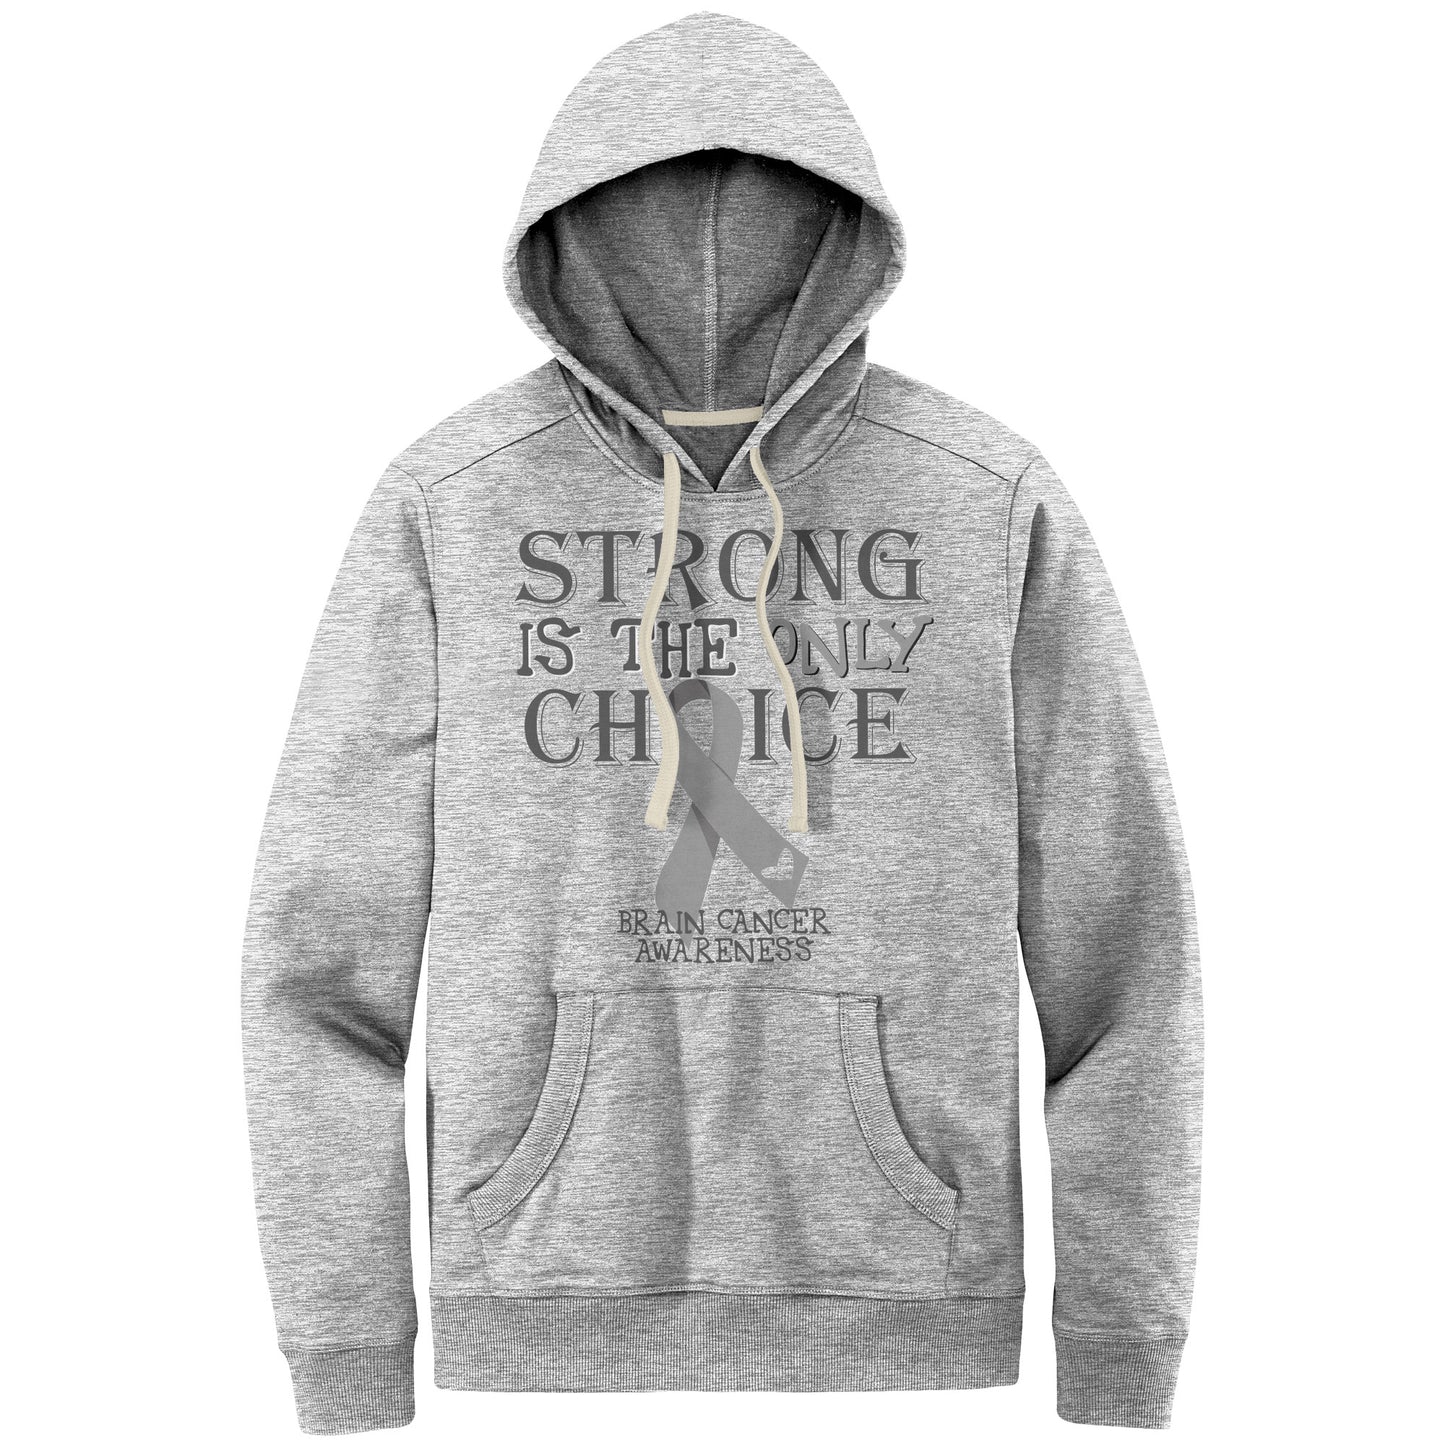 Strong is the Only Choice -Brain Cancer Awareness T-Shirt, Hoodie, Tank